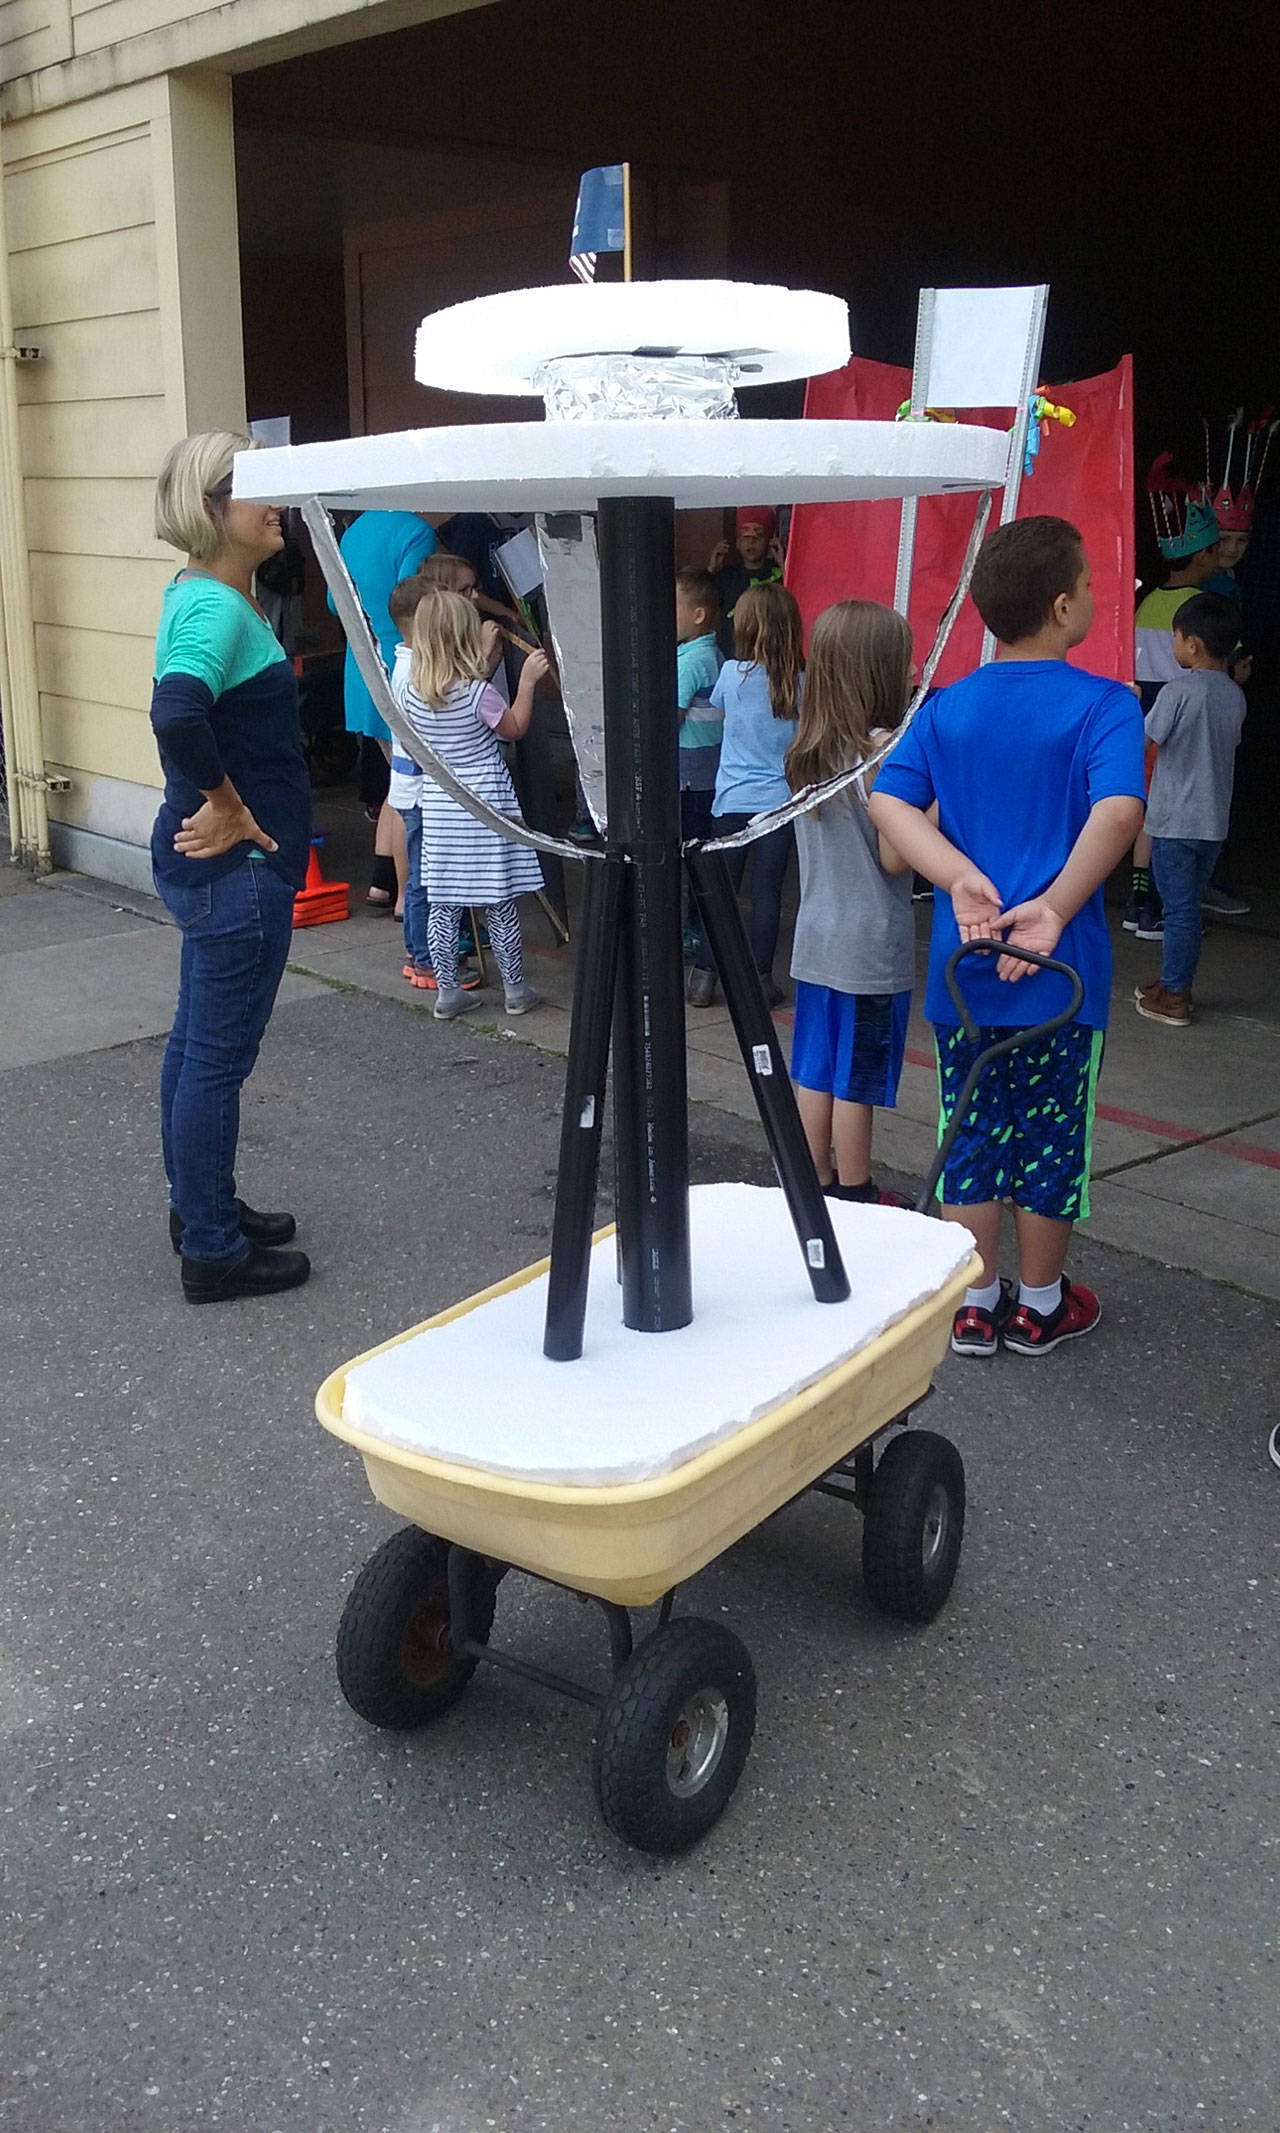 Students made their own floats for the end-of-school parade. (Ian A. Snively/Kitsap News Group)